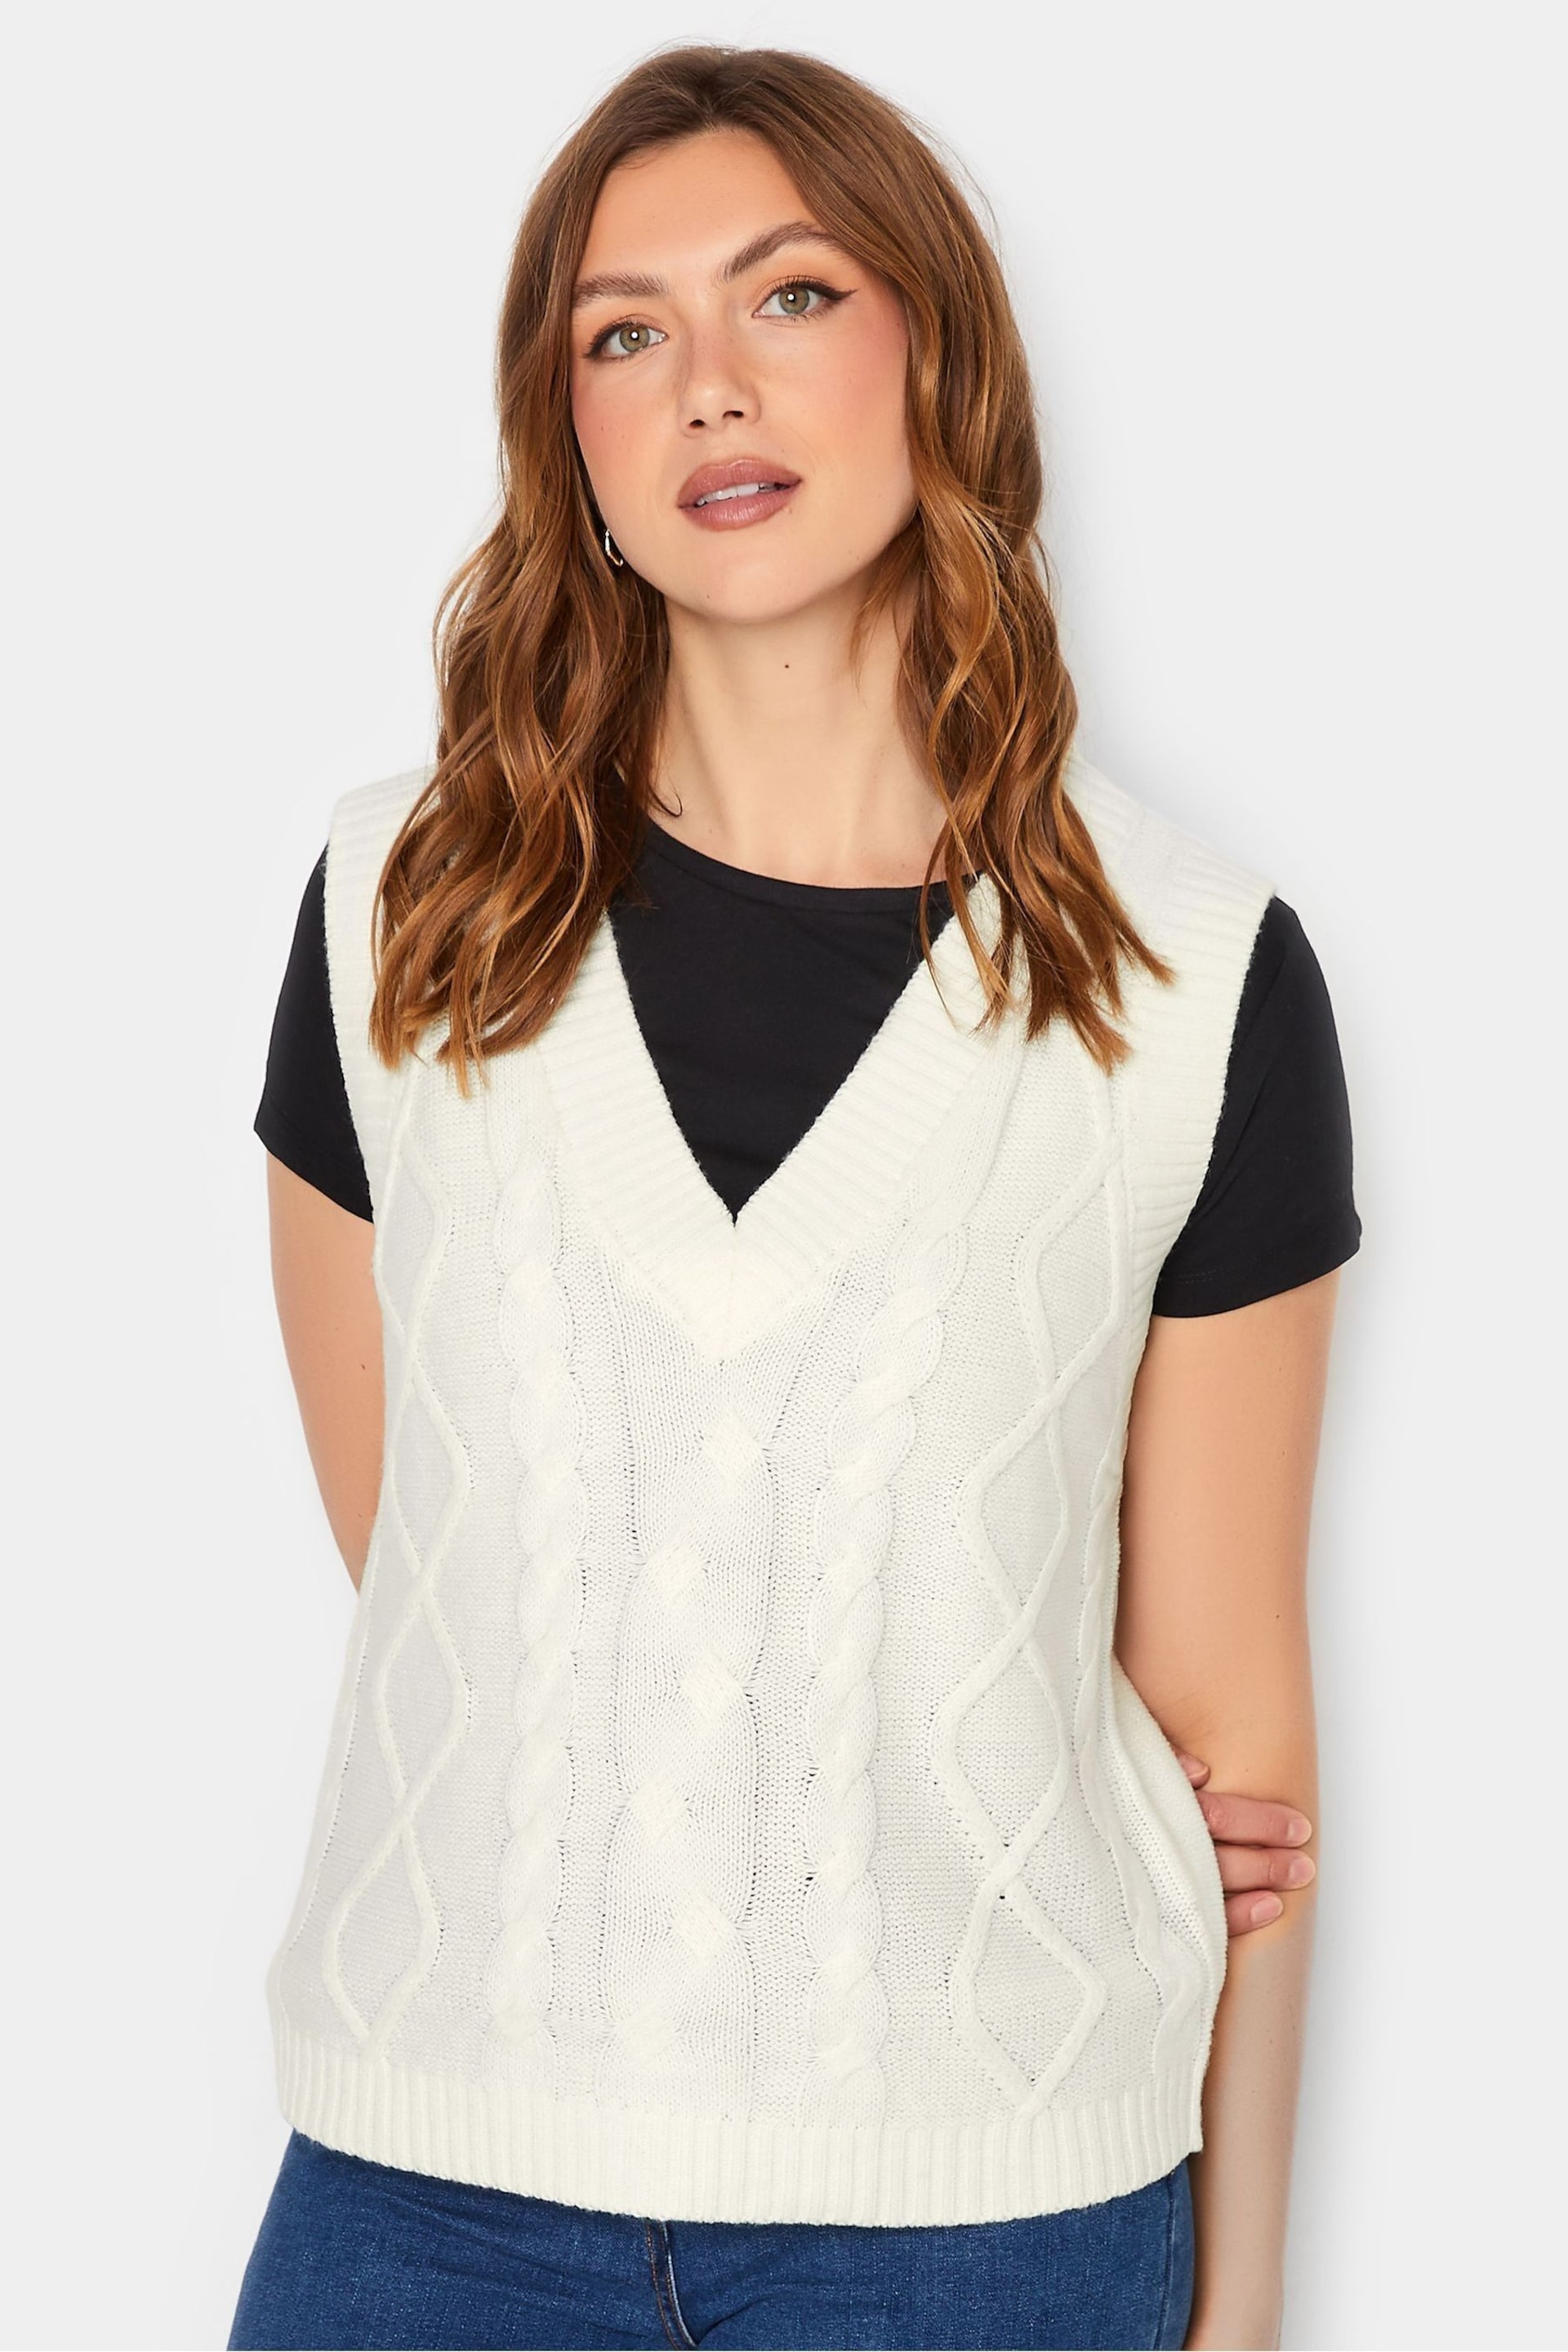 Long Tall Sally White Cable Knit Sweater Vest - Image 1 of 4